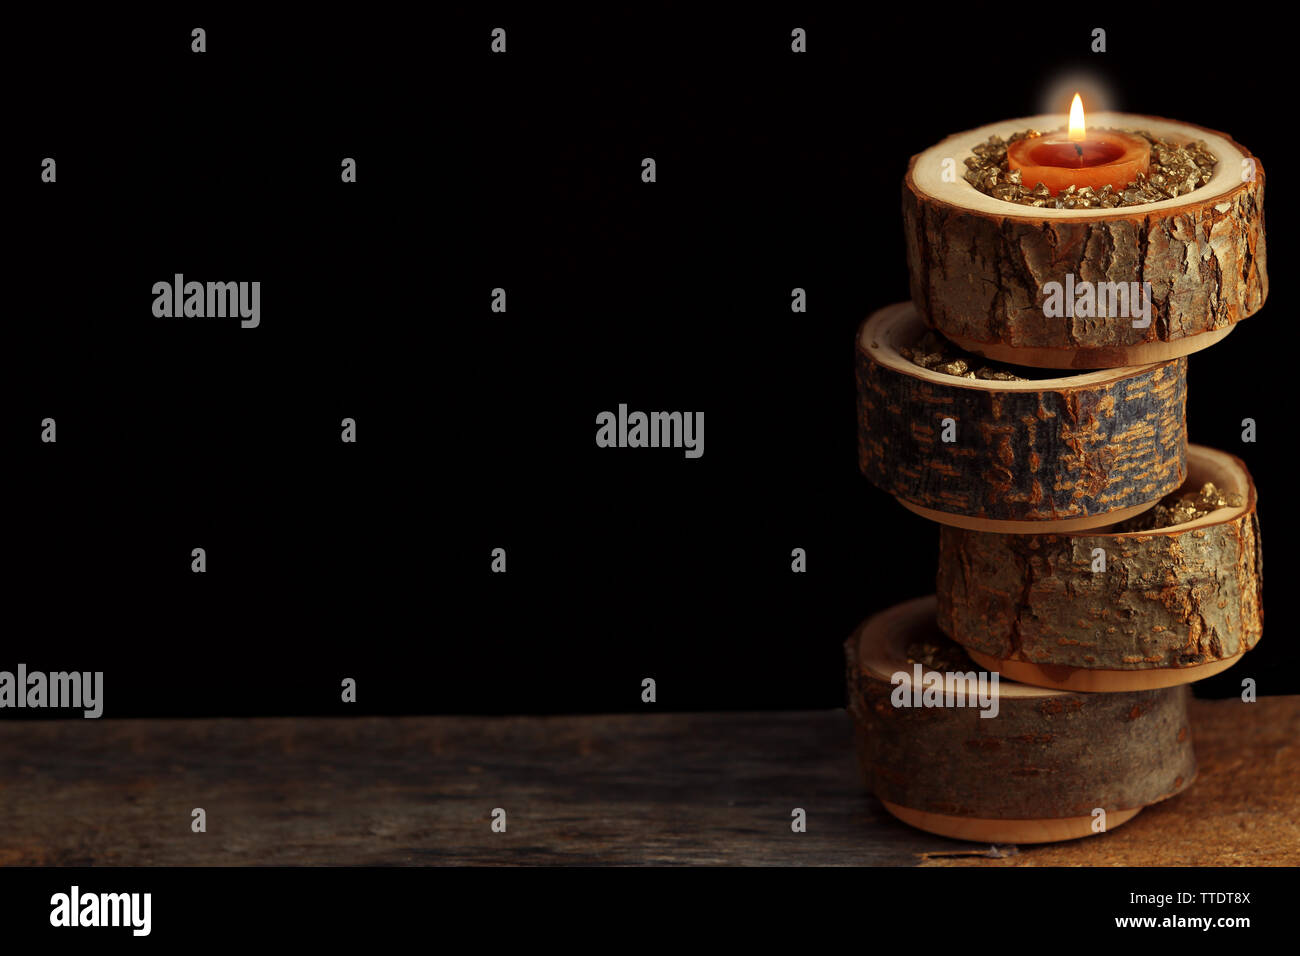 Composition of candle on black background Stock Photo